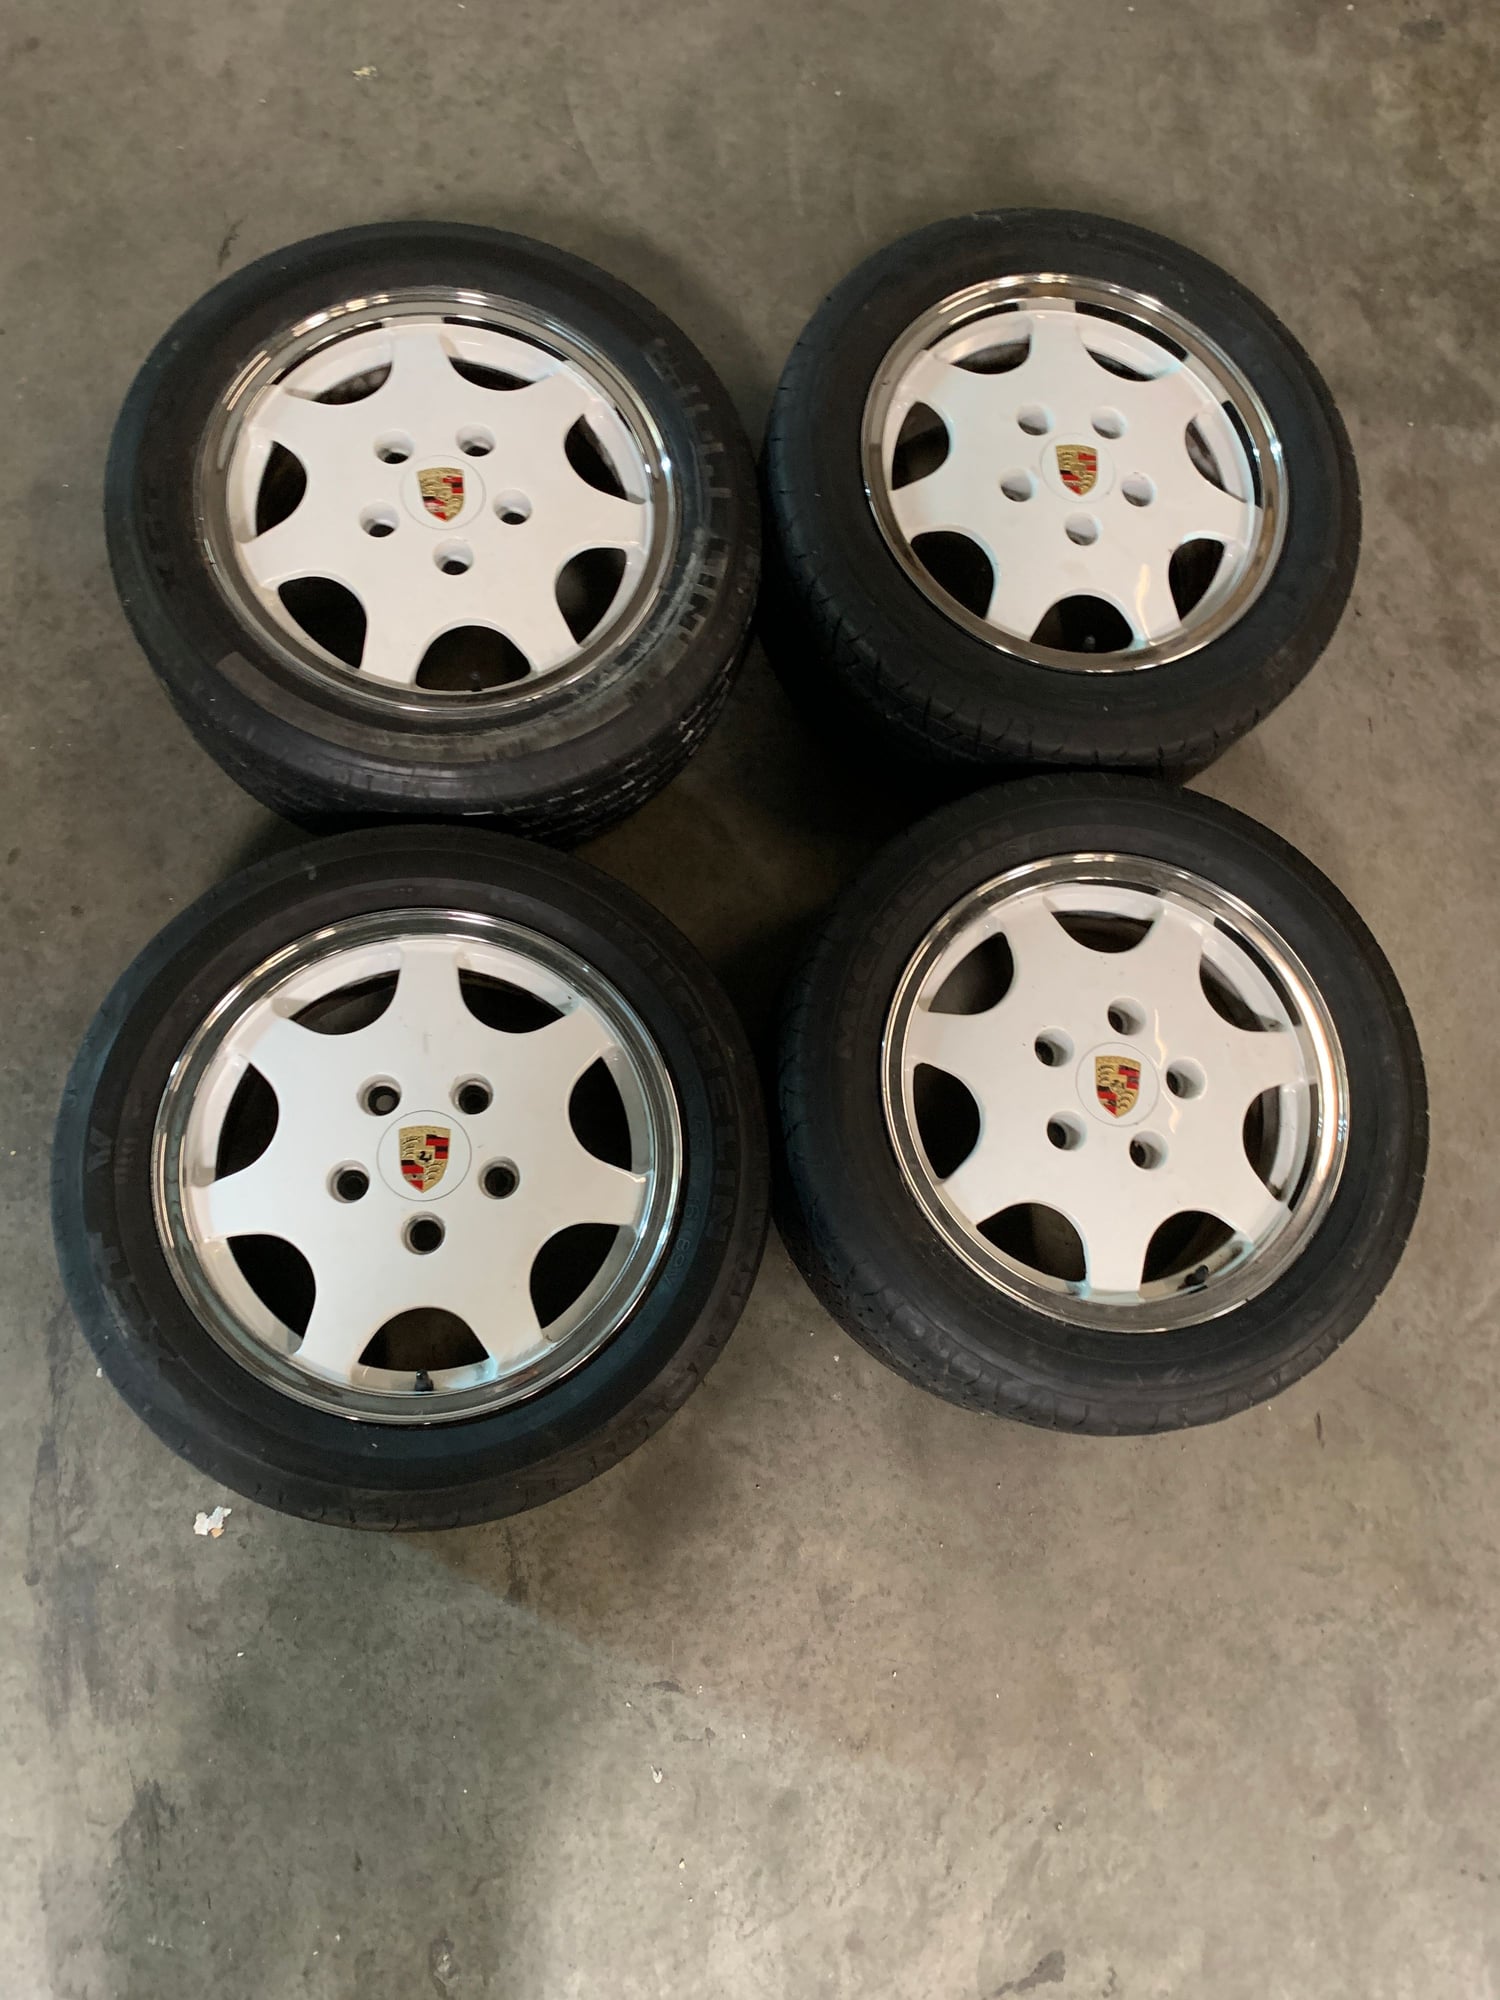 Wheels and Tires/Axles - Porsche D90 Wheels with Tires - Used - 1989 to 1994 Porsche 911 - 1982 to 1991 Porsche 944 - Baltimore, MD 21075, United States